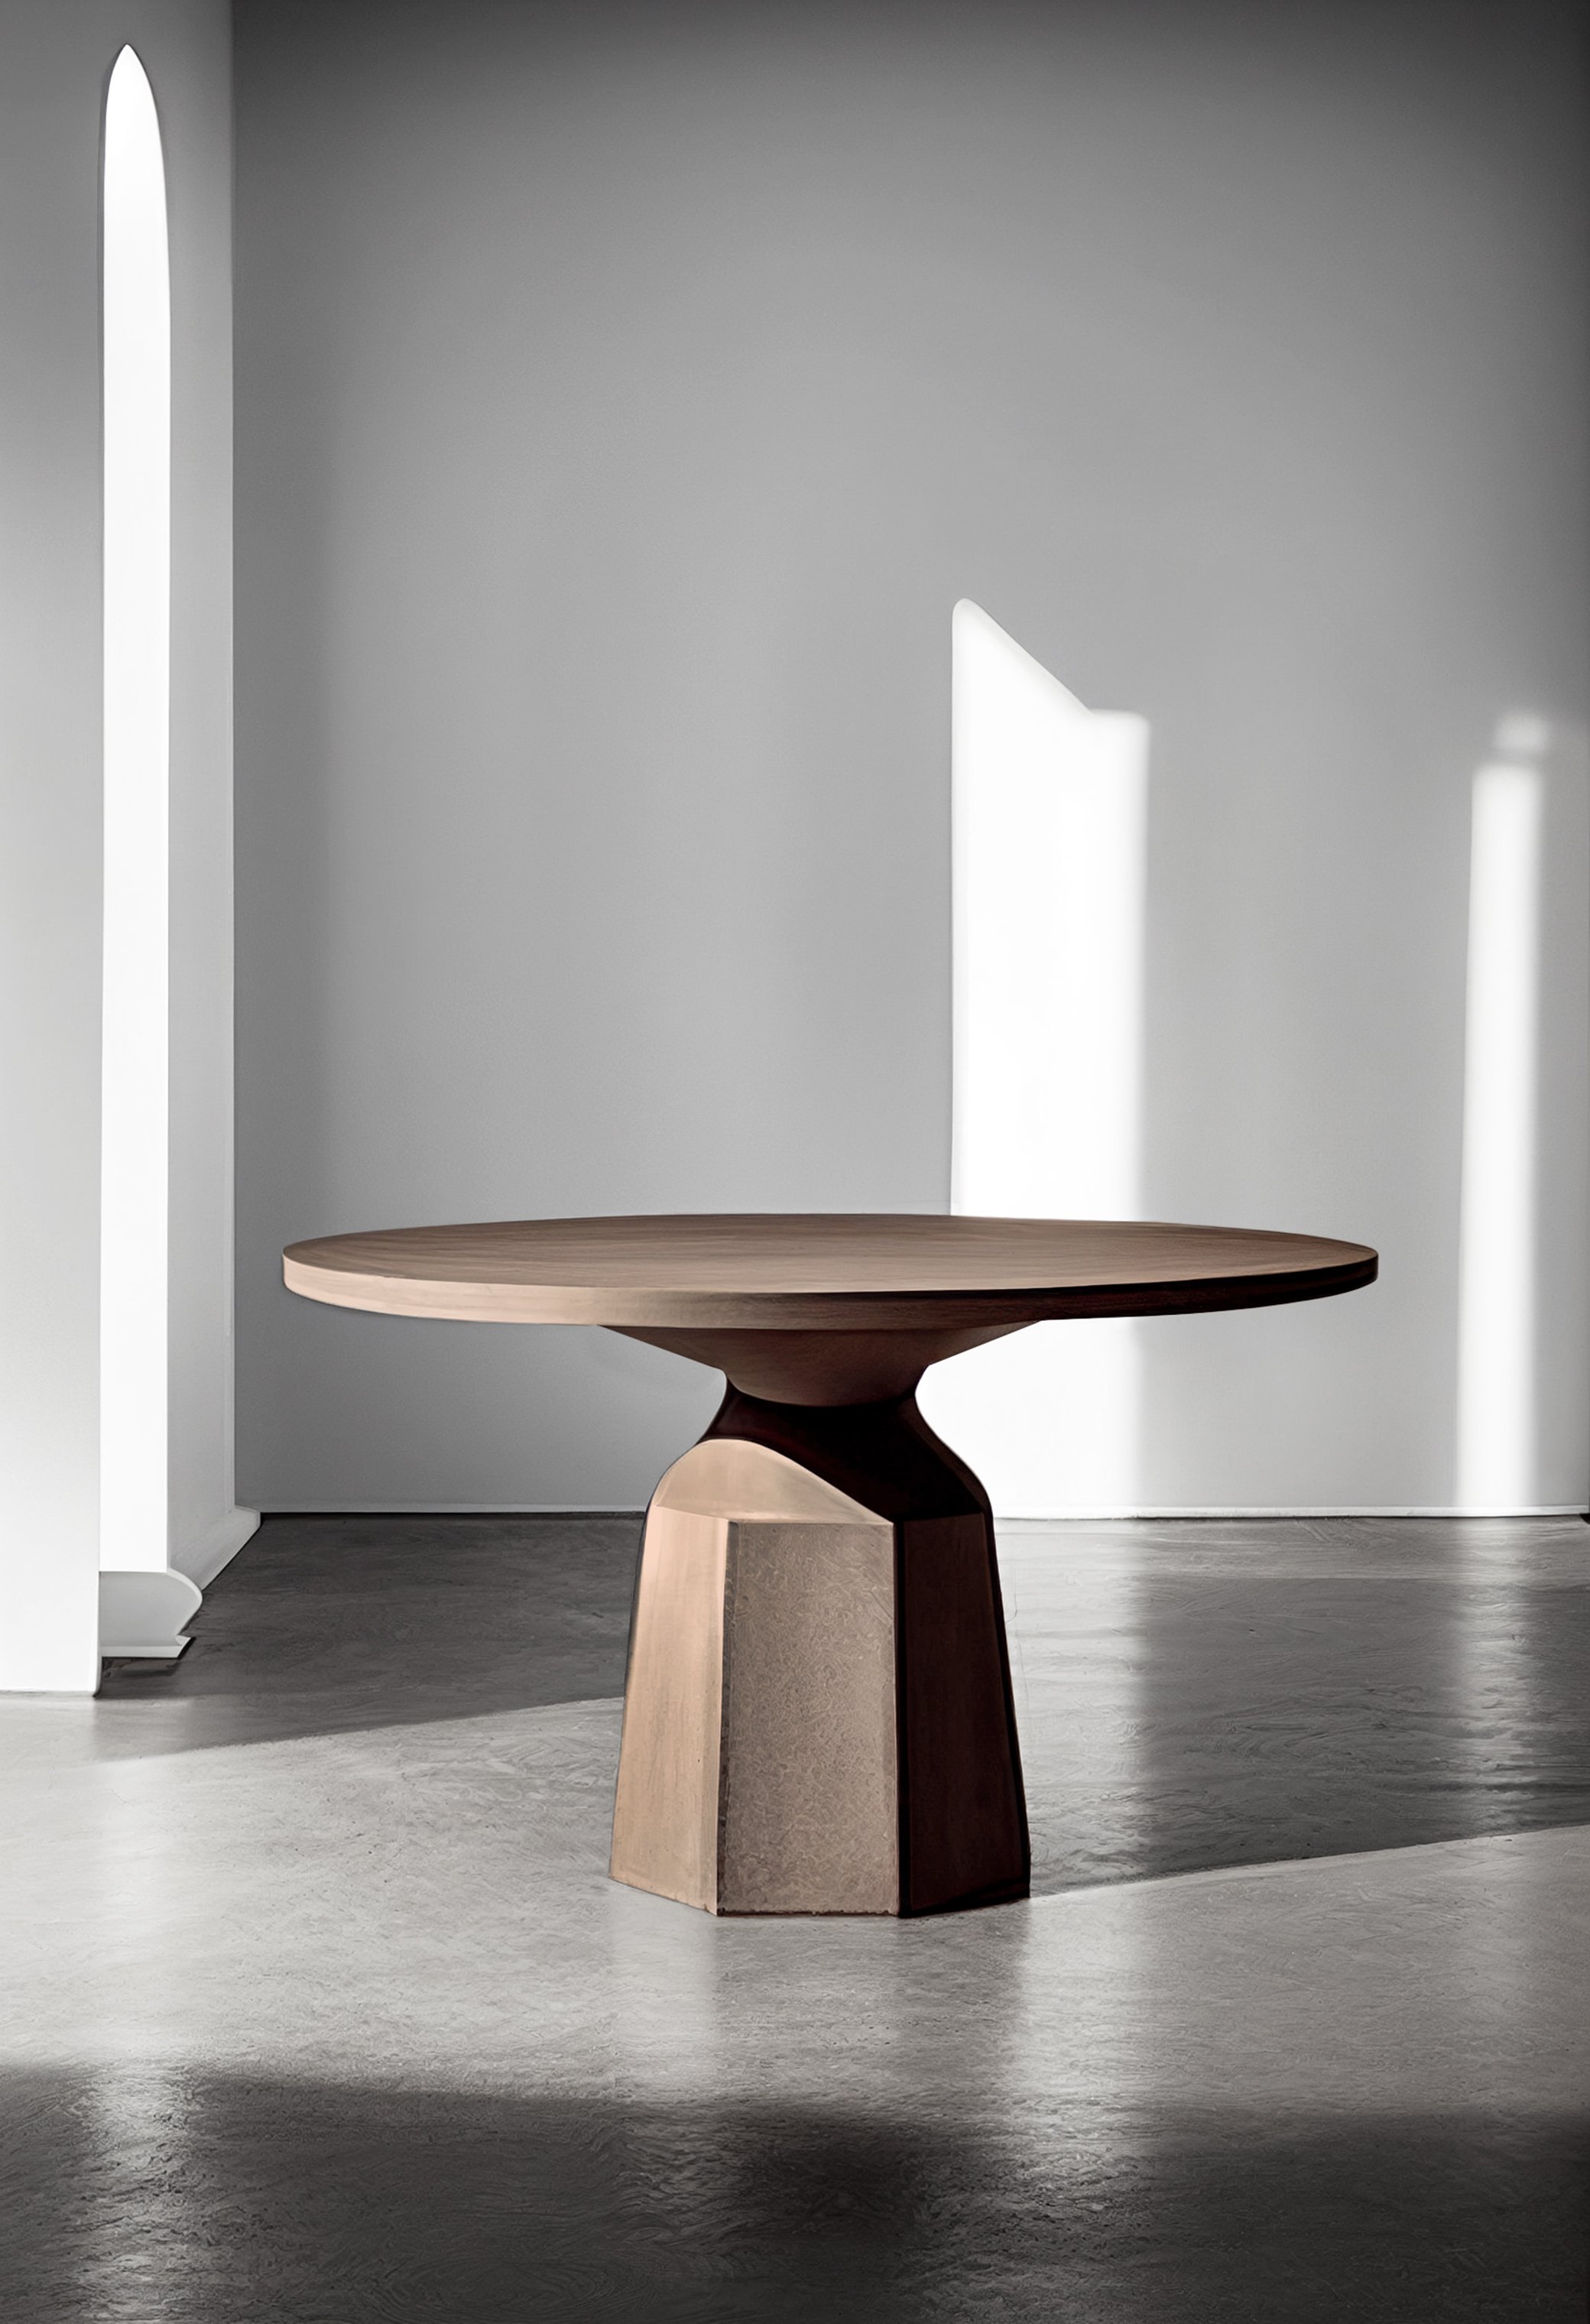 Moka Dining Table D, Round Table For Four by NONO —4.jpg